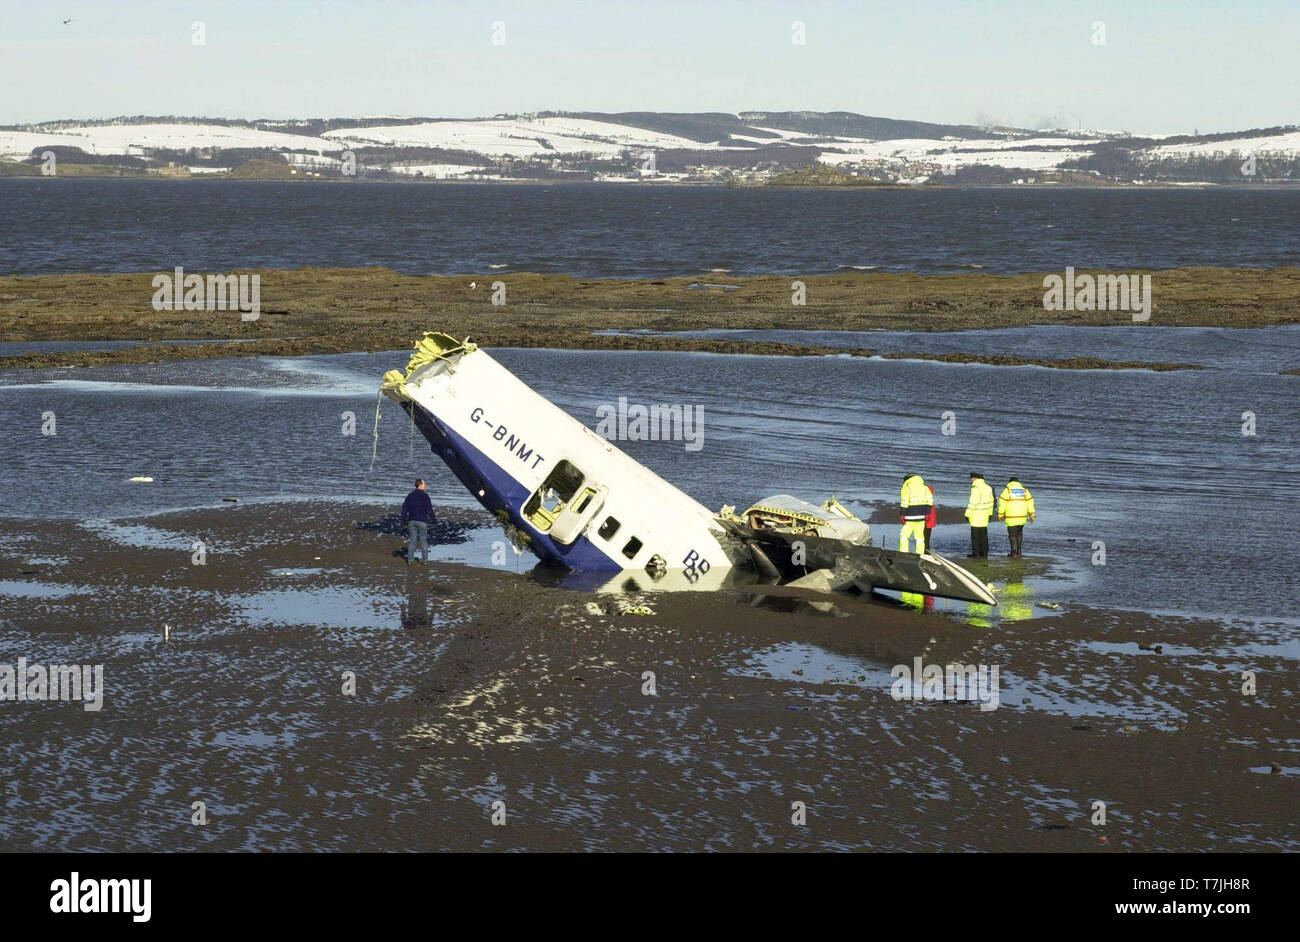 Investigators look at the wreckage of the Loganair Short 360 aircraft, which crashed in the Firth of Forth last night after taking off from Edinburgh Airport, as the tide receeds this morning ( Wednesday 28/2/01 ). Stock Photo